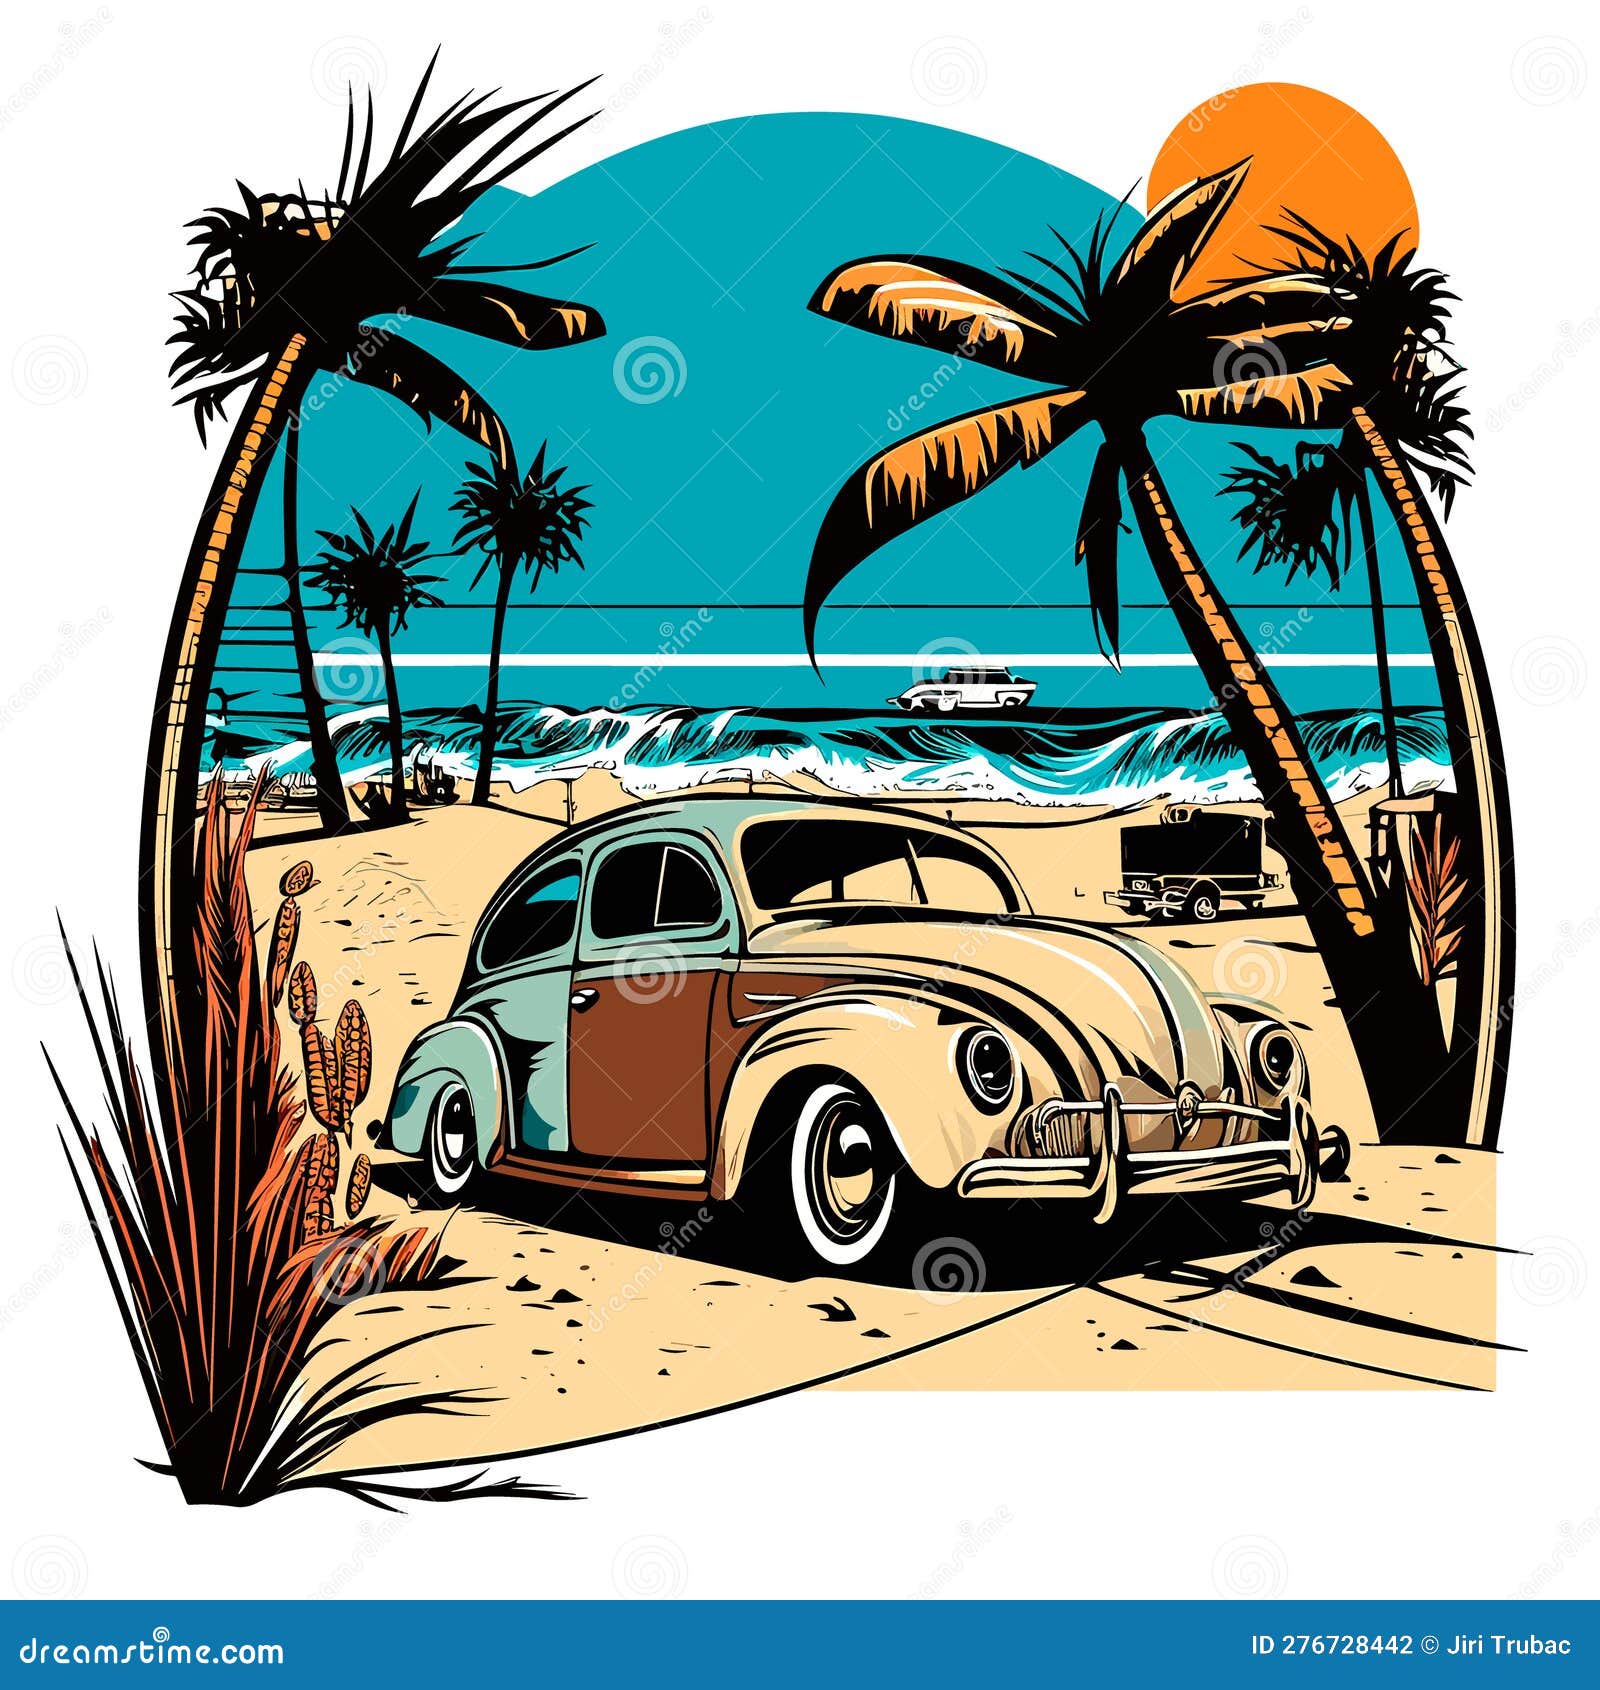 holliday road trip by vehicle. silhouettes of palm trees with the setting sun in the background. cartoon  ,